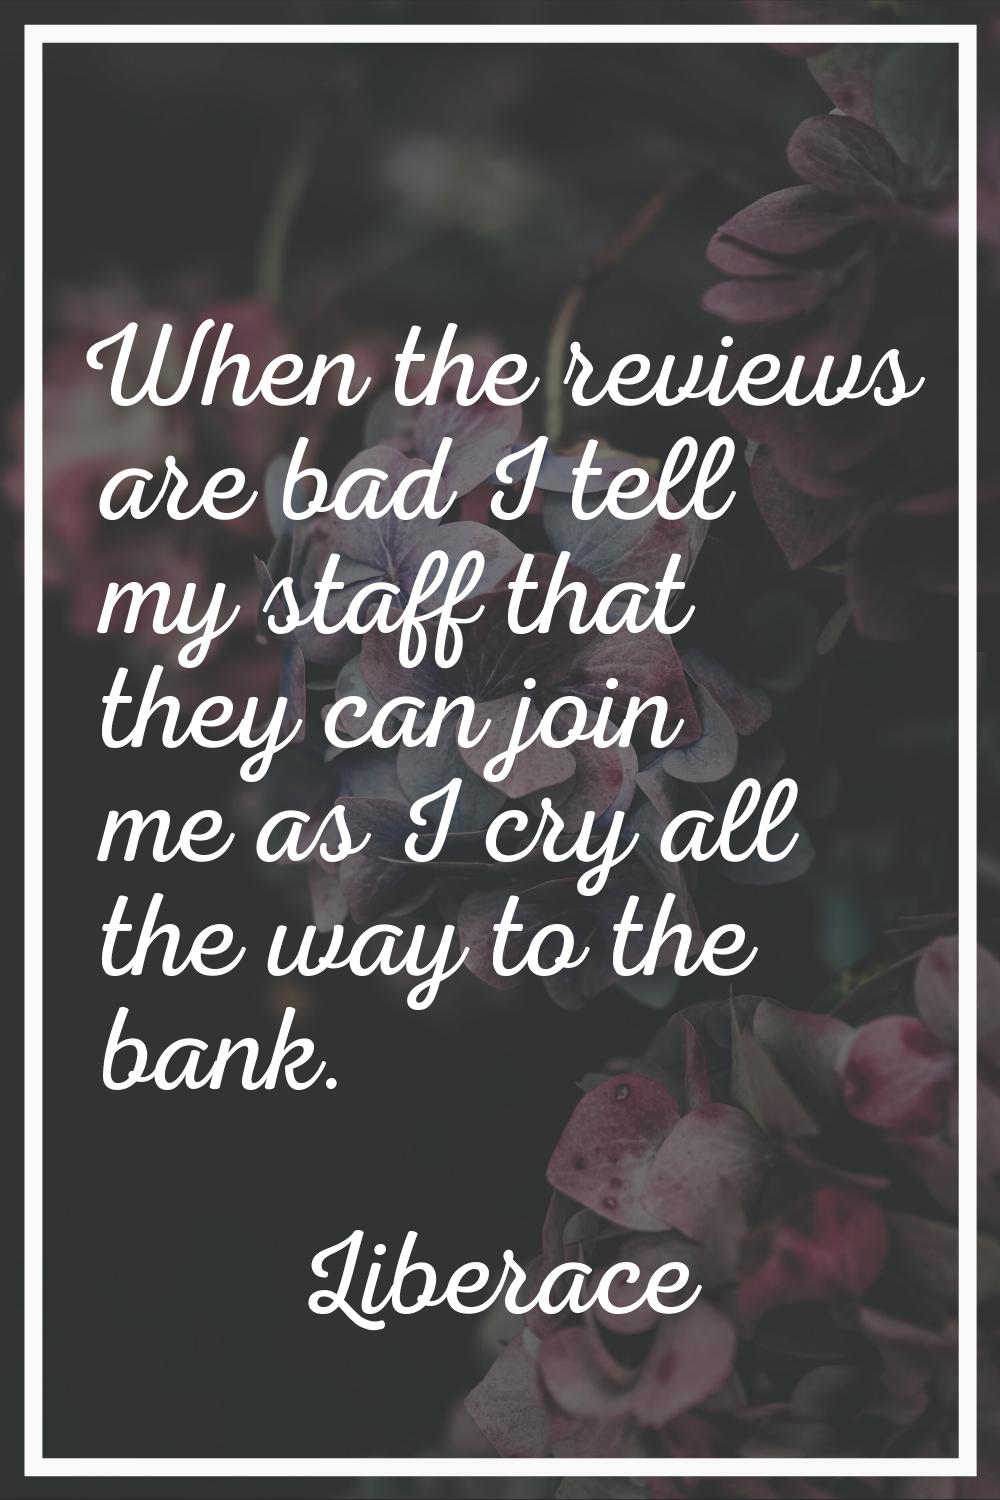 When the reviews are bad I tell my staff that they can join me as I cry all the way to the bank.